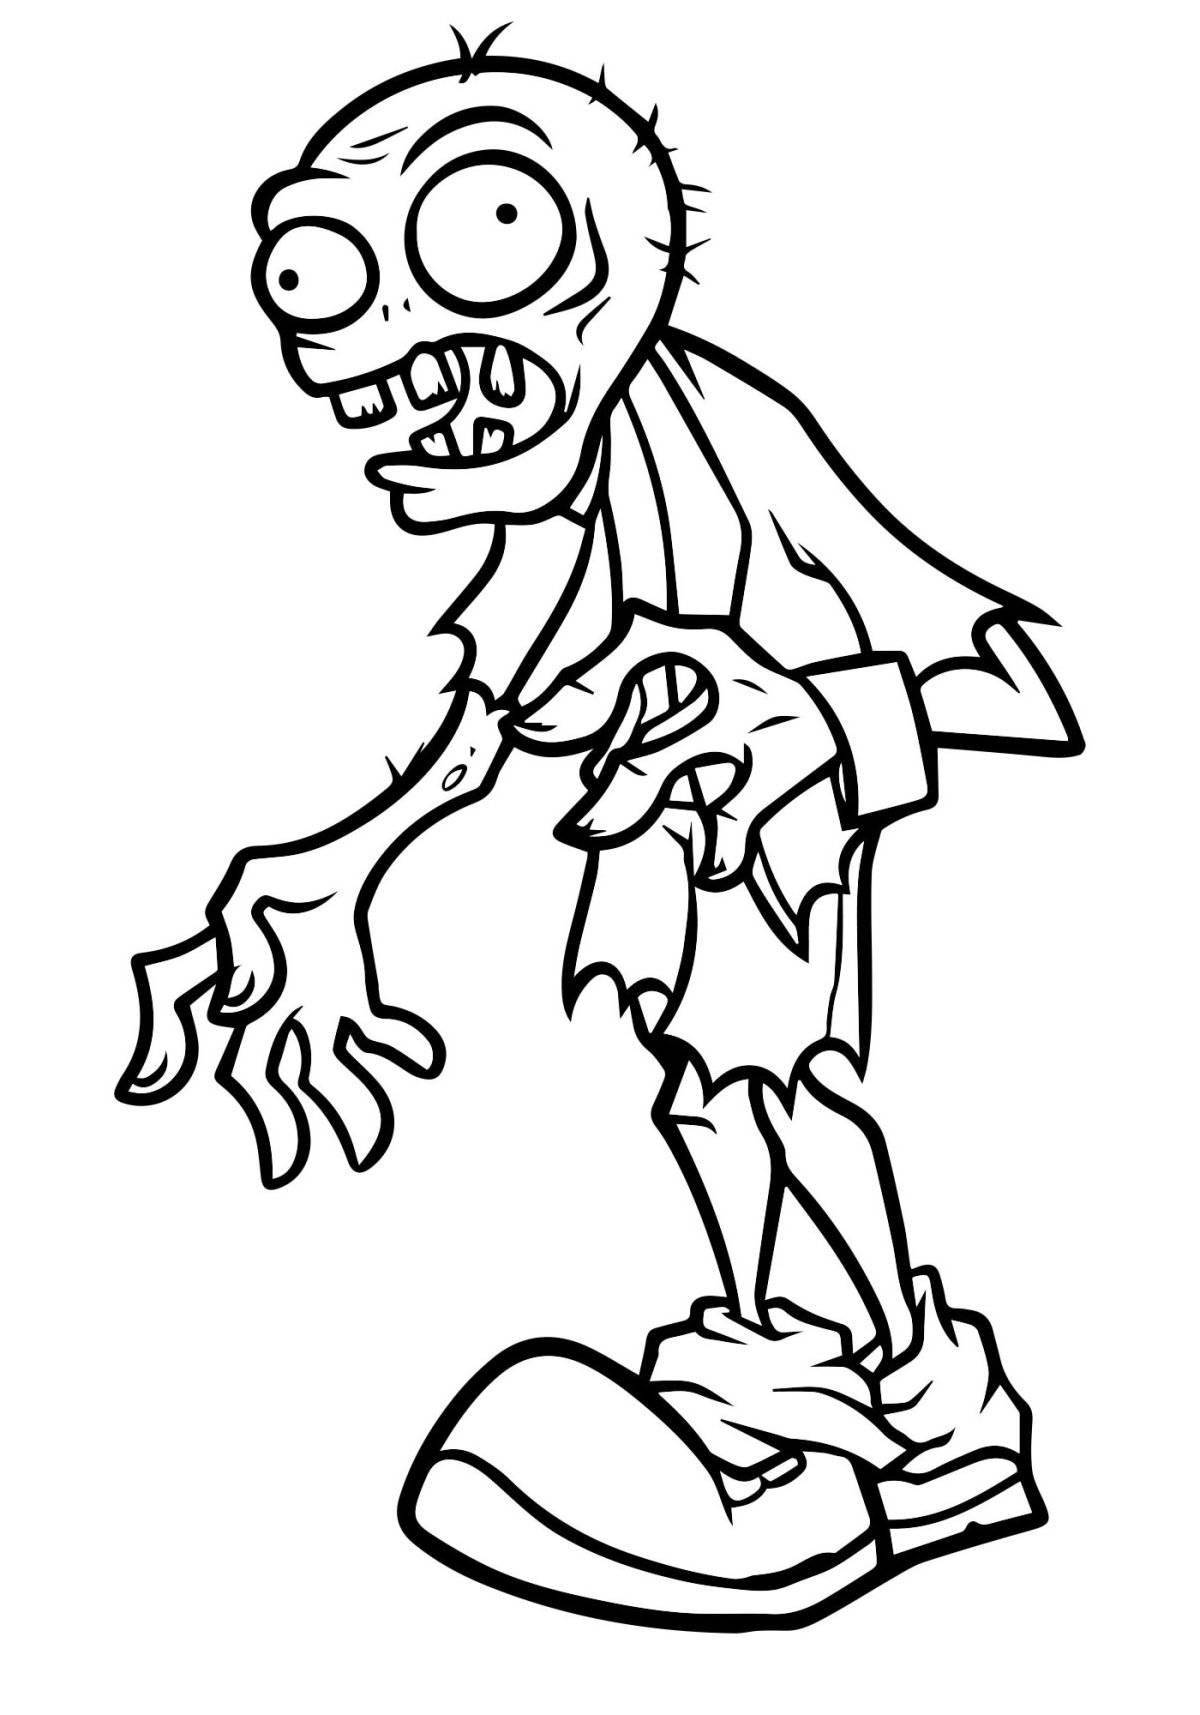 Magic zombie trap coloring page